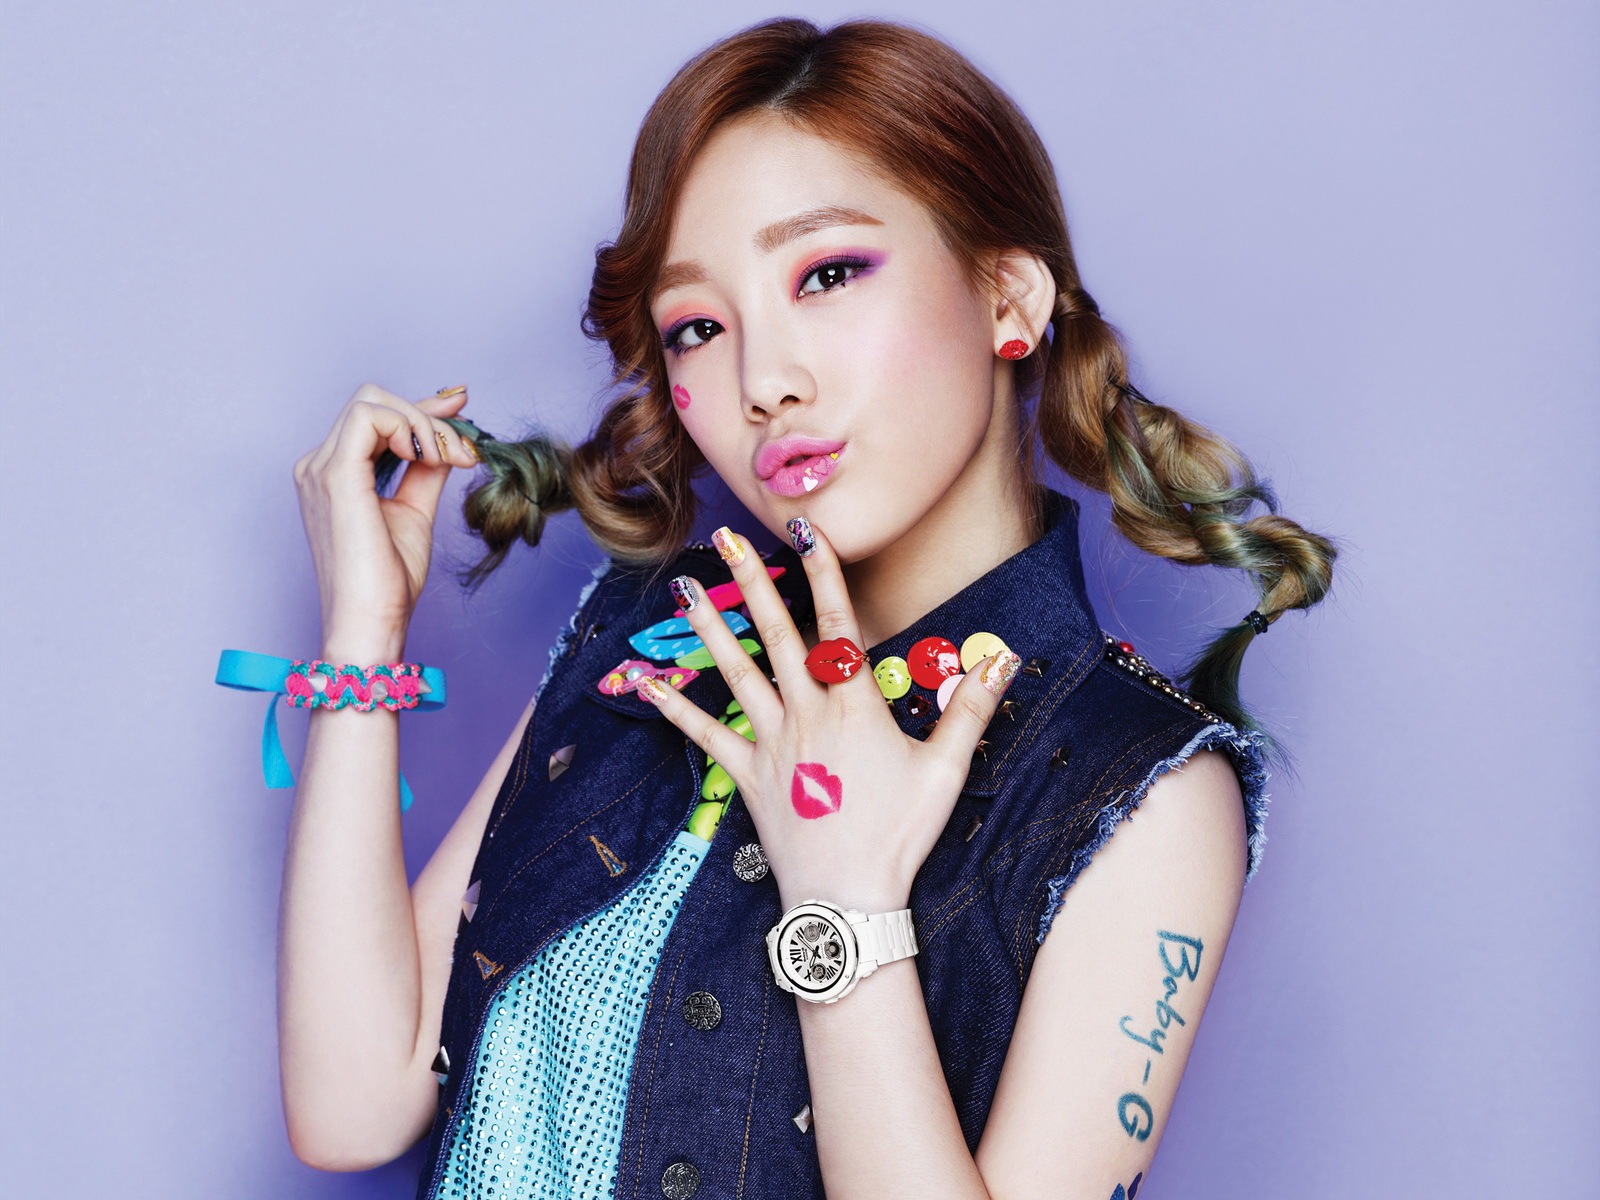 Girls Generation SNSD Casio Kiss Me Baby-G wallpapers #4 - 1600x1200